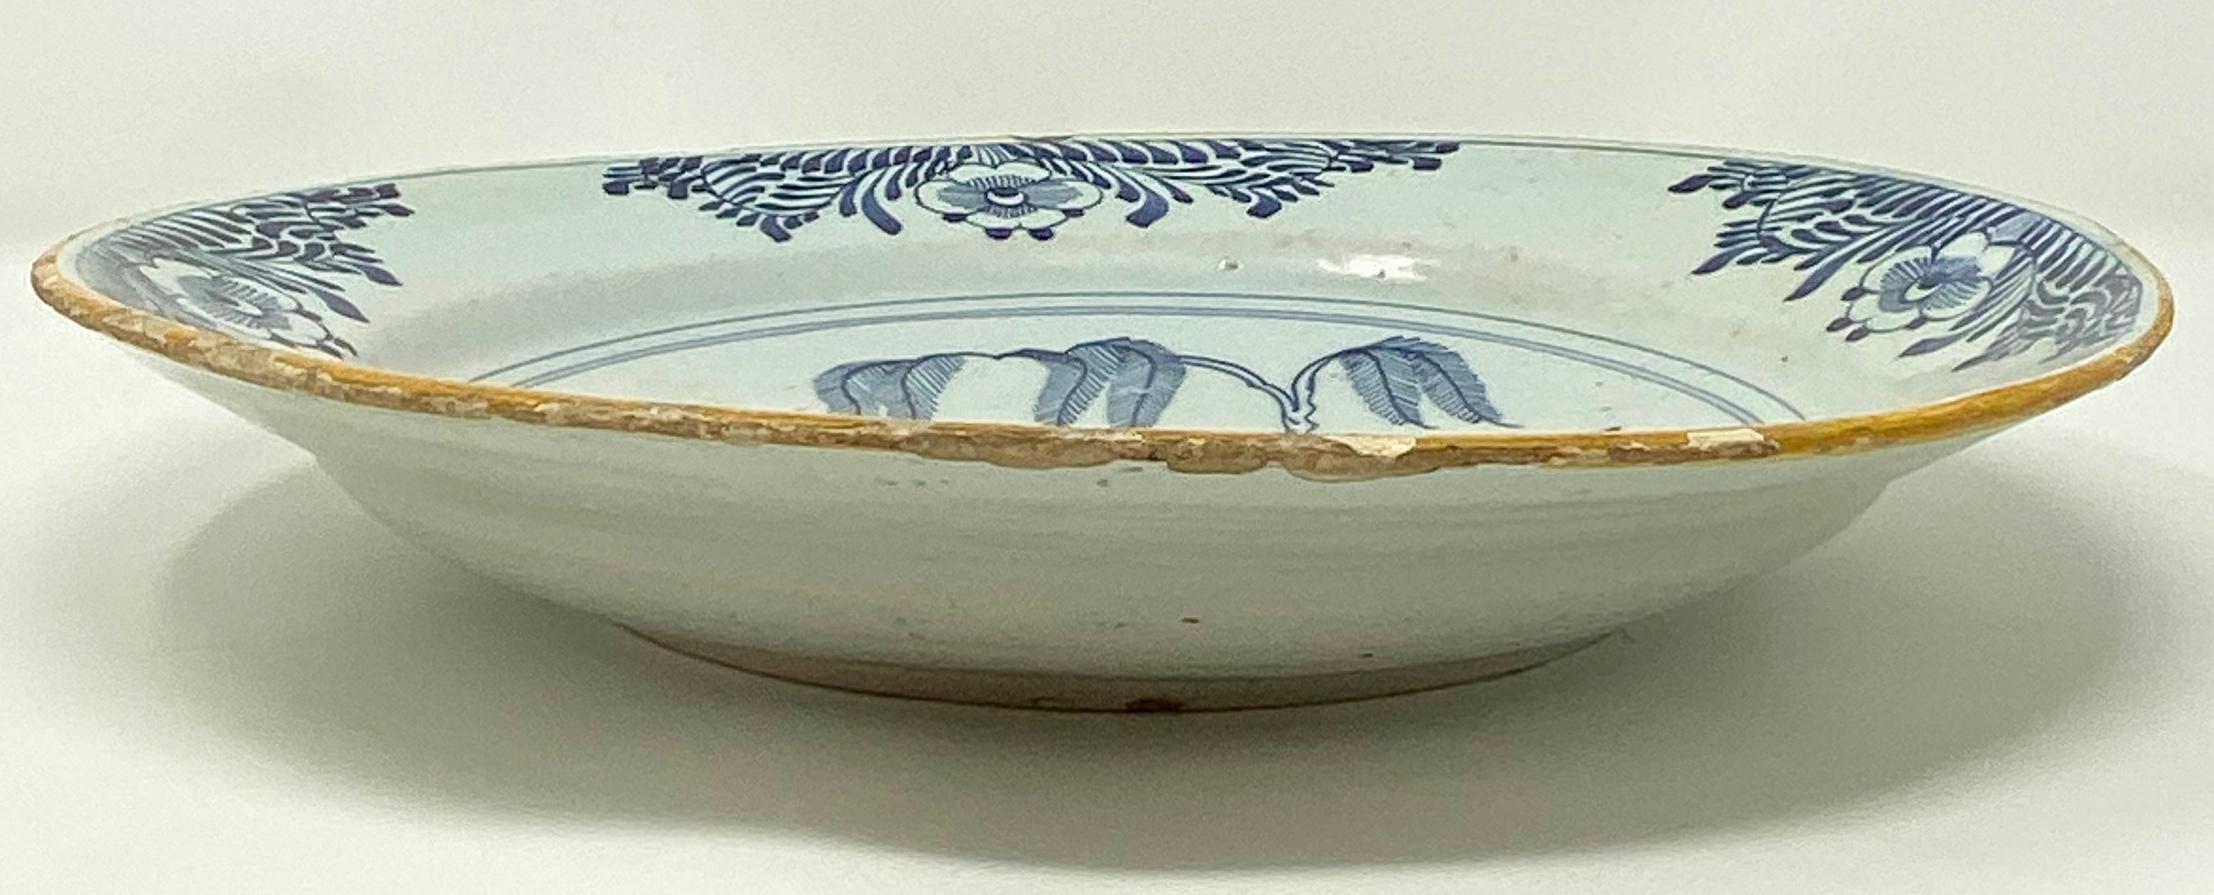 Antique Dutch Porcelain Charger in the Chinese Manner, circa 1750-1780 In Good Condition For Sale In New Orleans, LA